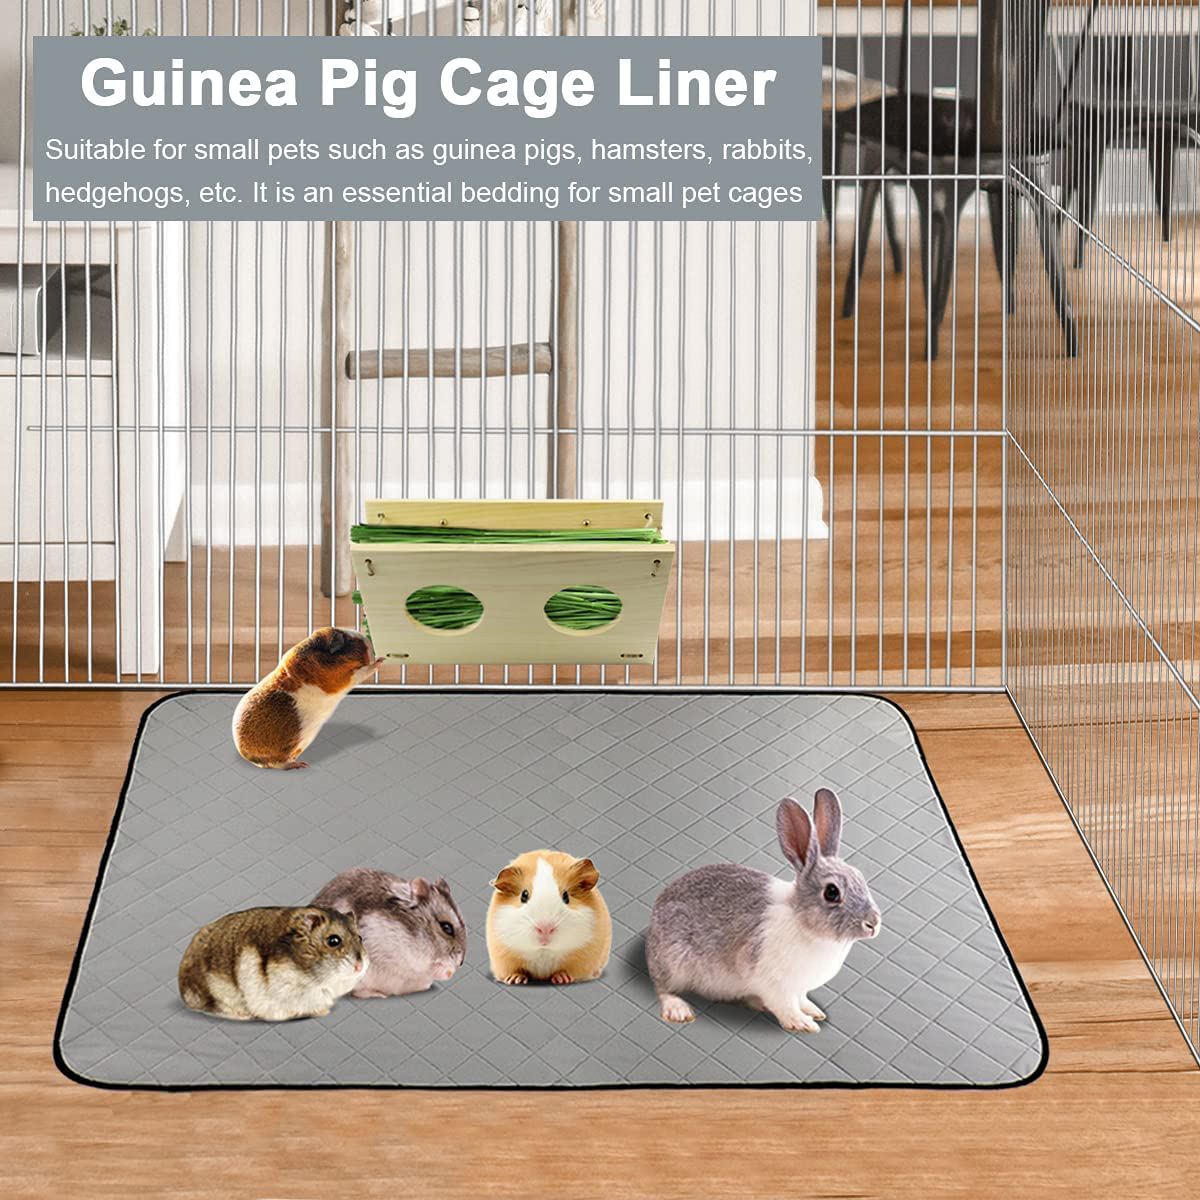 Guinea Pig Cage Liners, 2 Pack Guinea Pig Pee Pads Super Absorbent & Washable, Guinea Pig Bedding anti Slip Bottom, Guinea Pig Cage Accessories for for Small Animals